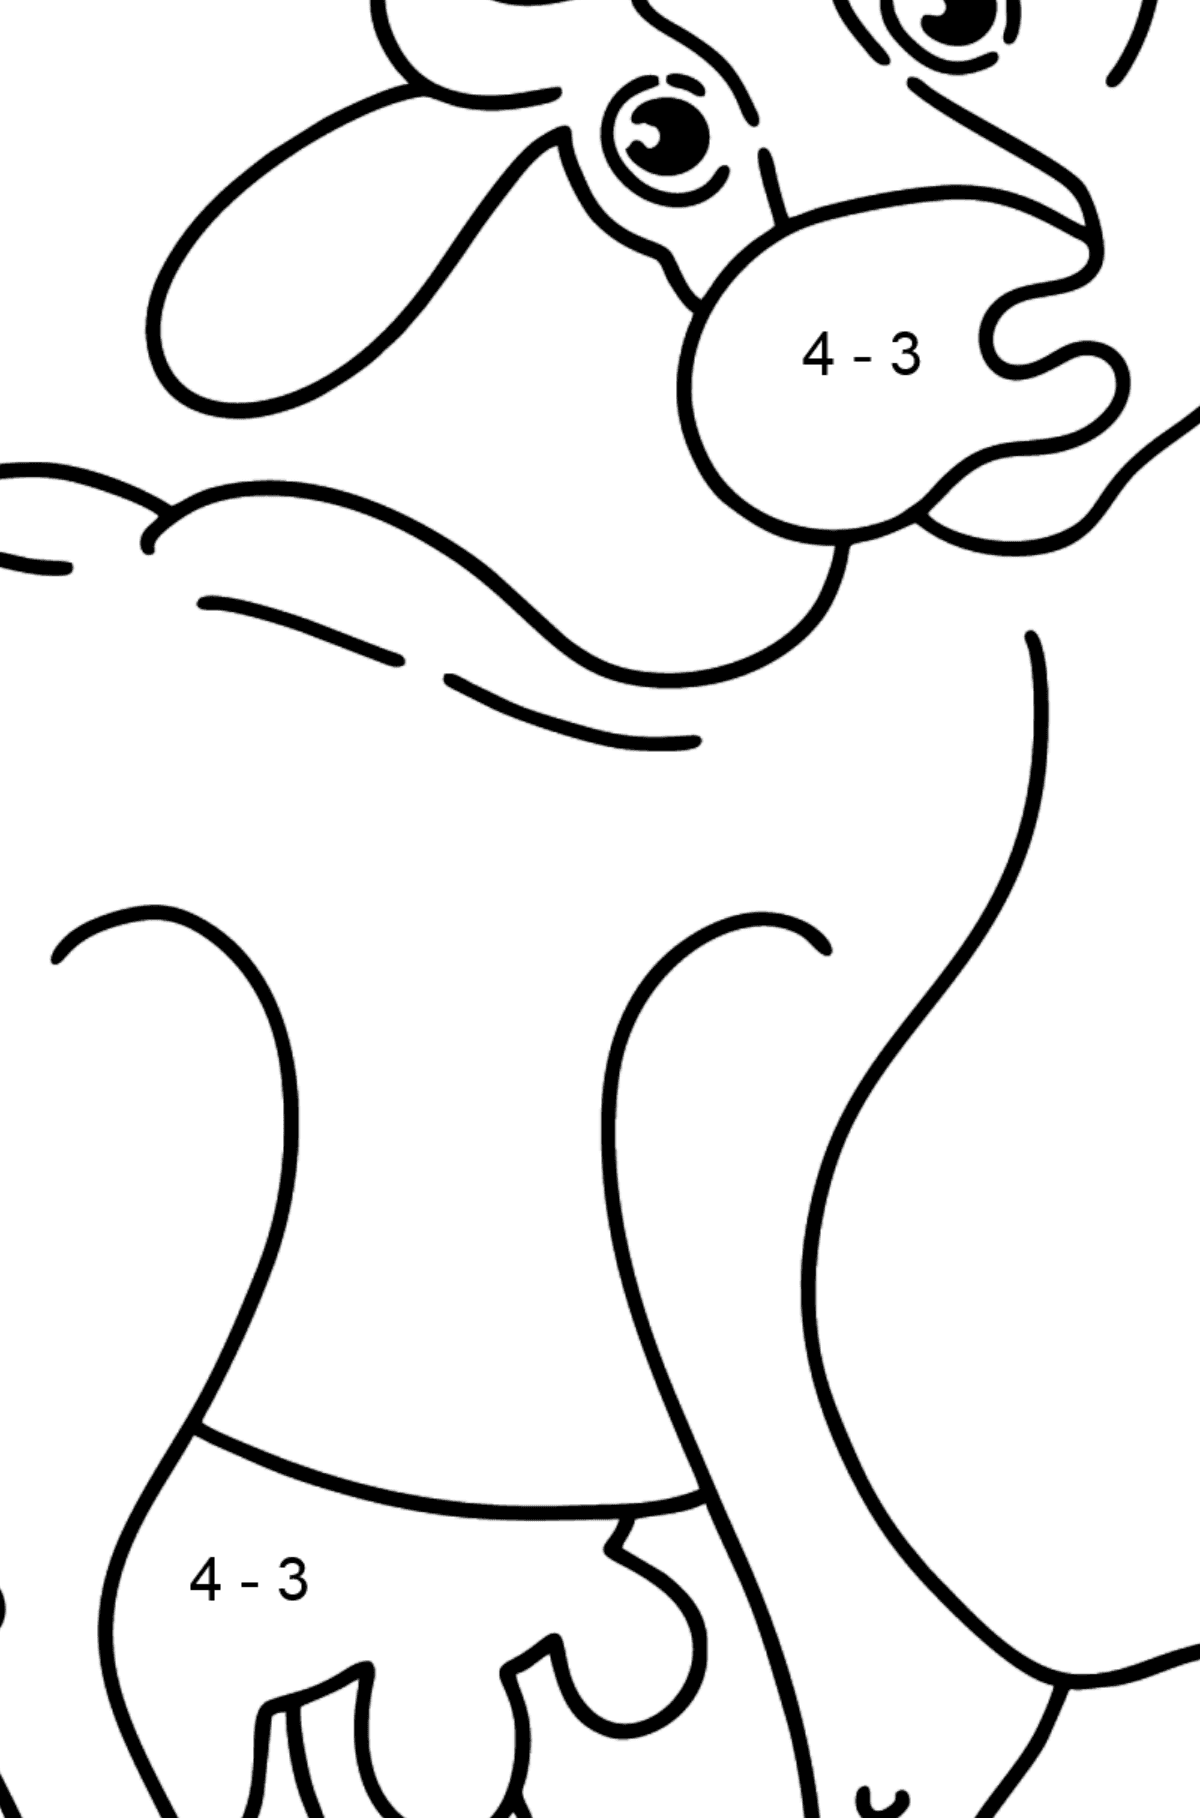 Cow coloring page - Math Coloring - Subtraction for Kids